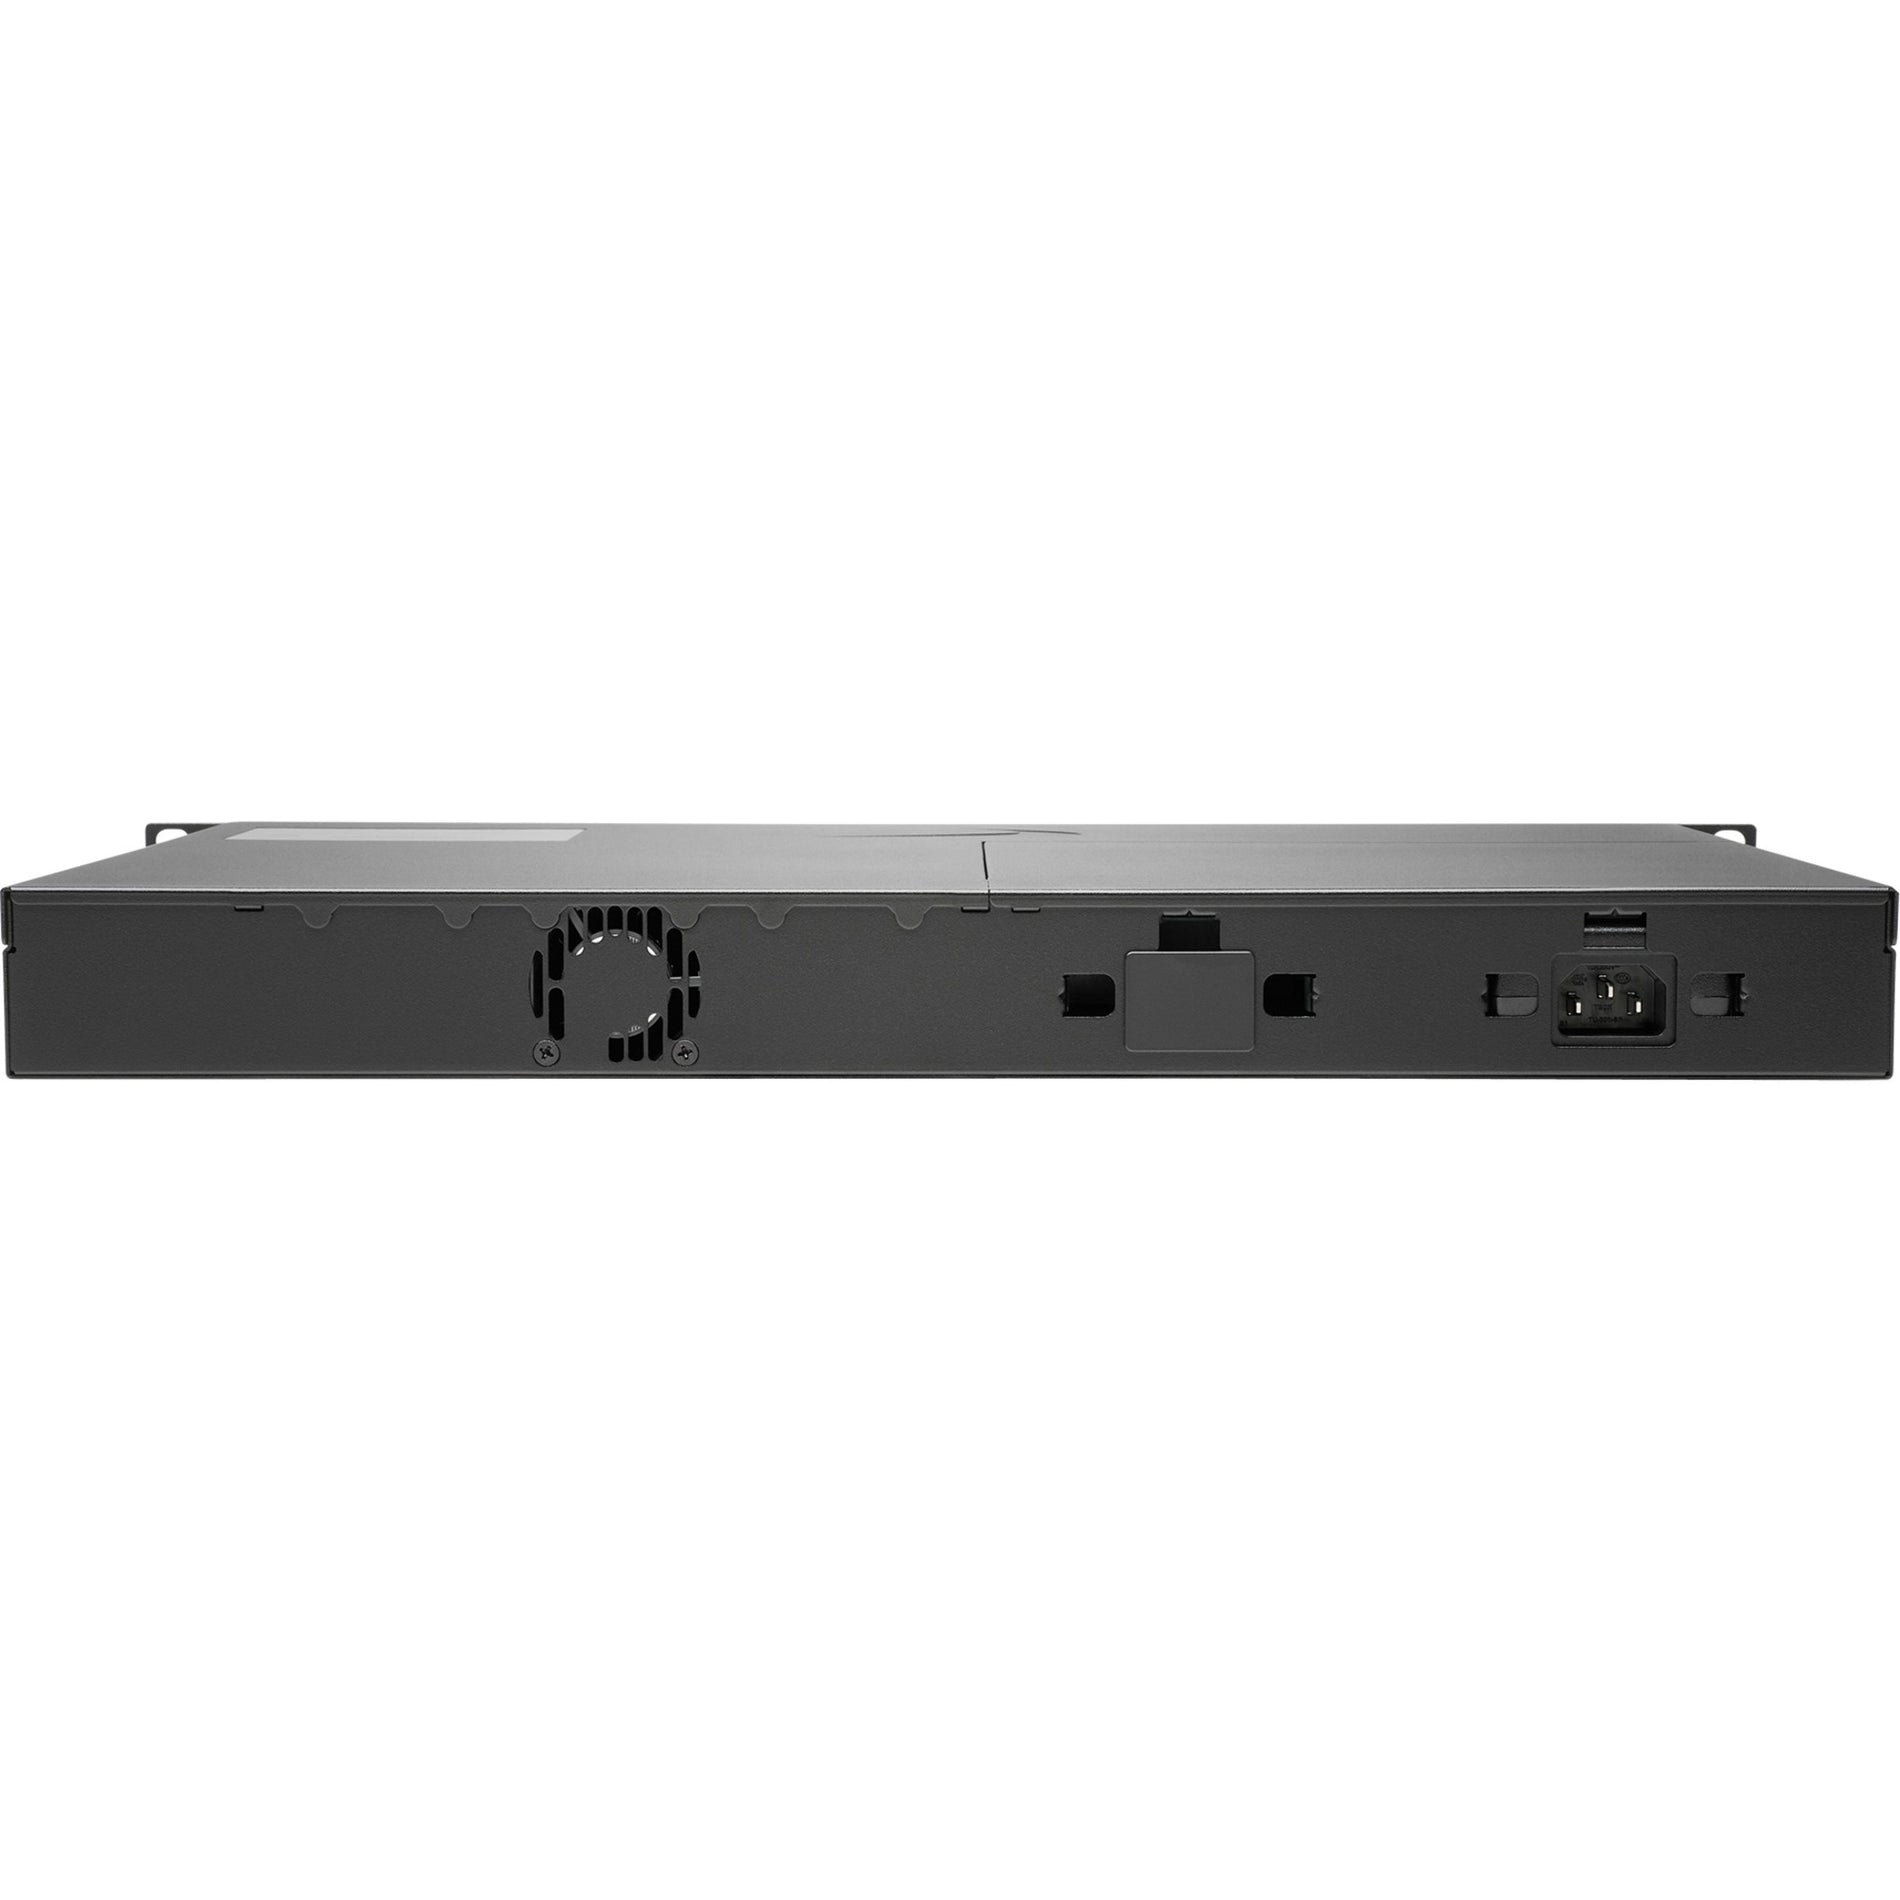 SonicWall 02-SSC-8207 NSA 3700 Network Security/Firewall Appliance, 24 Ports, 10GBase-X, 10/100/1000Base-T, Rack-mountable